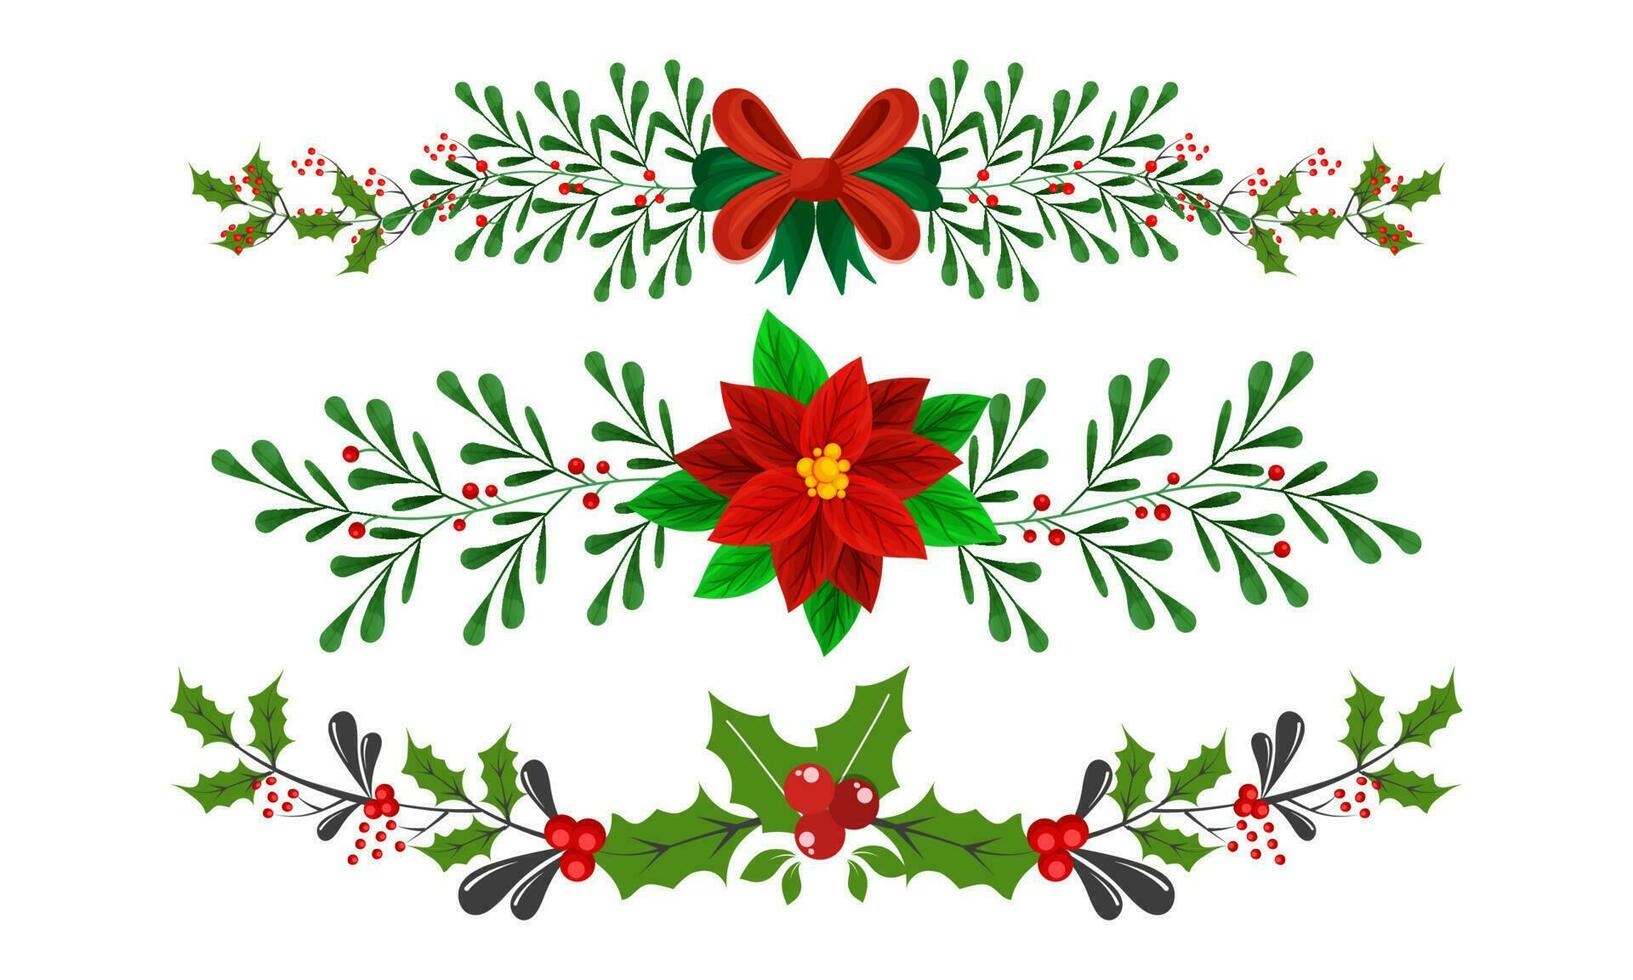 Poinsettia Flower With Berry Branches And Red Bow Ribbon On White Background. vector